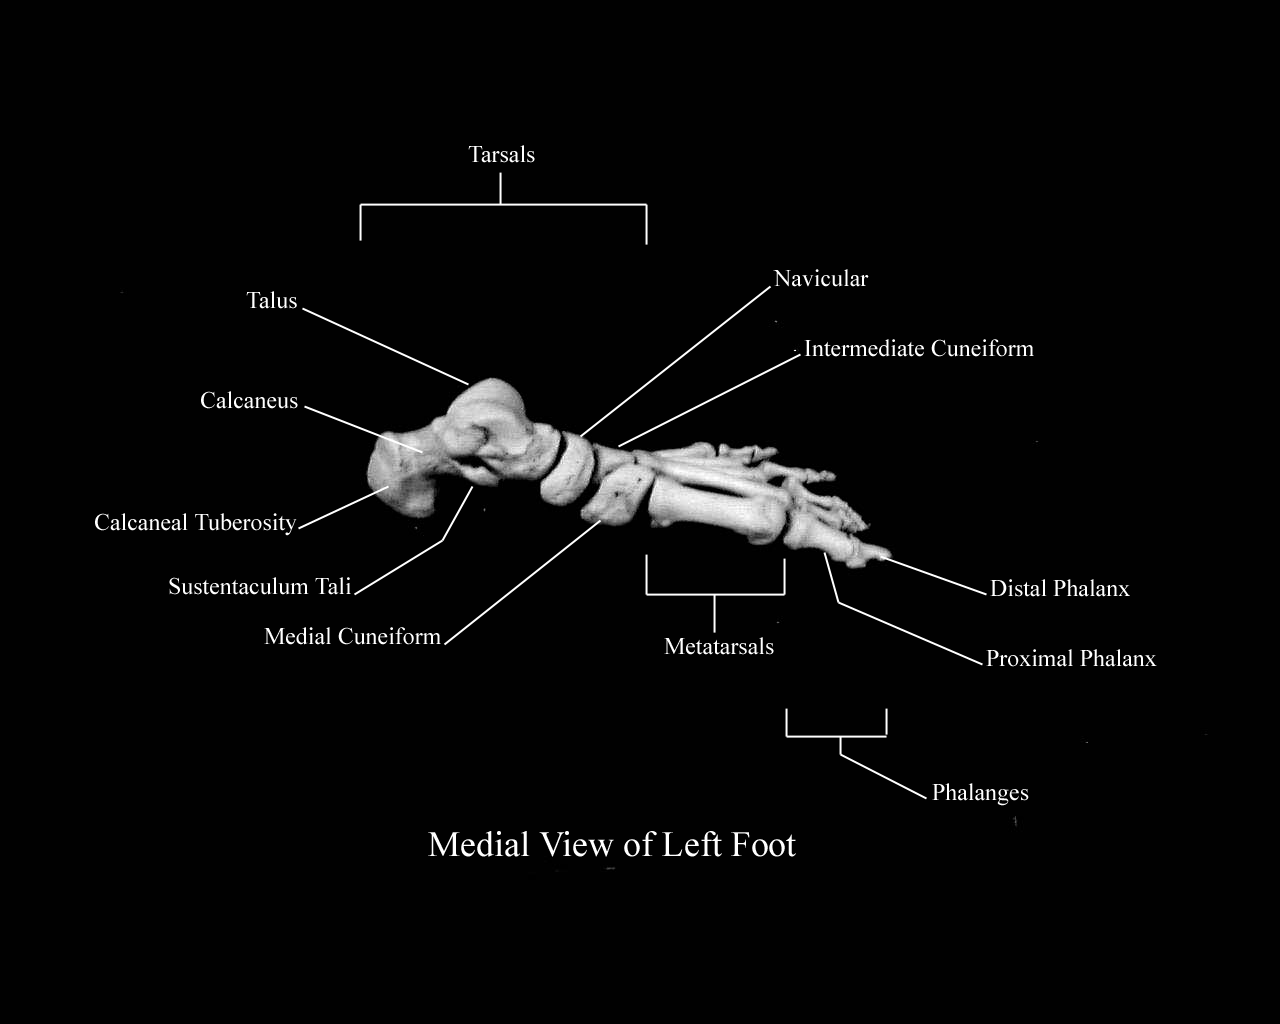 a labeled picture of the bones of the foot from a medial view